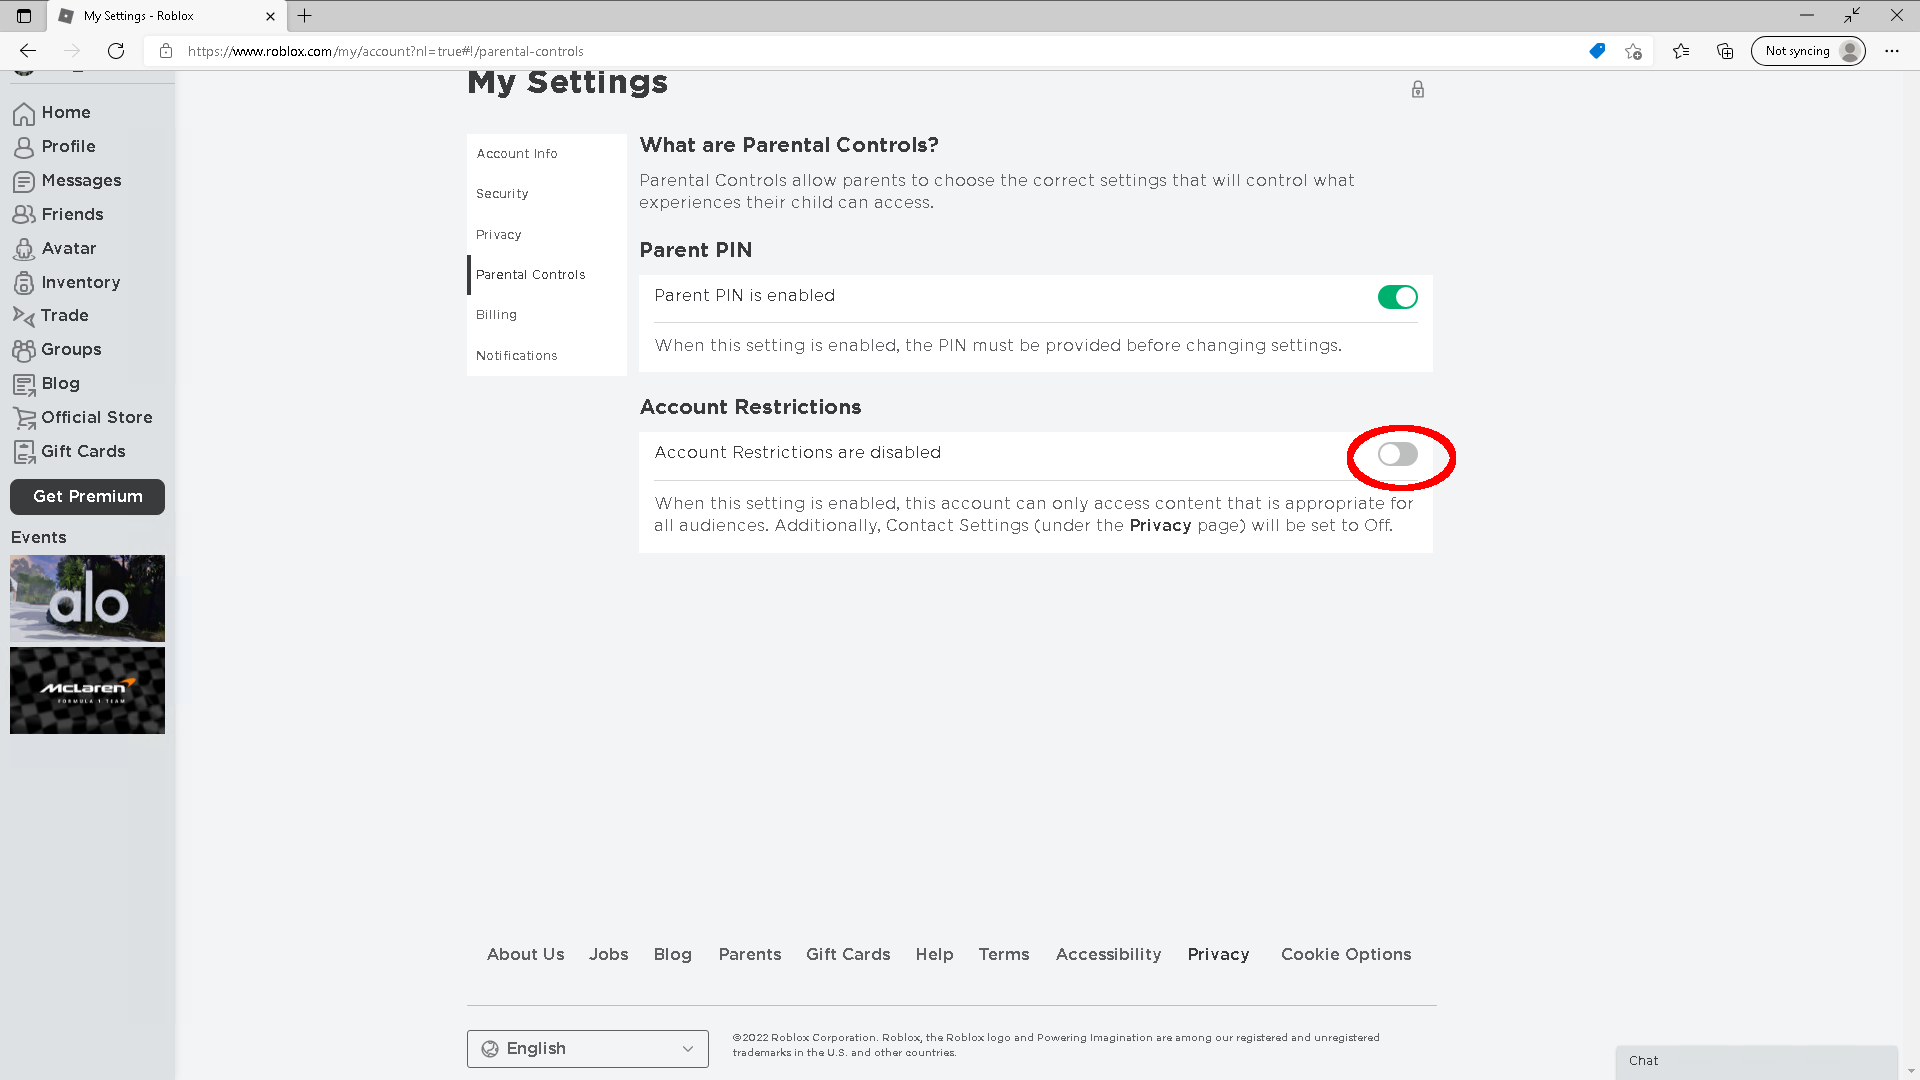 Account restrictions slider is highlighted